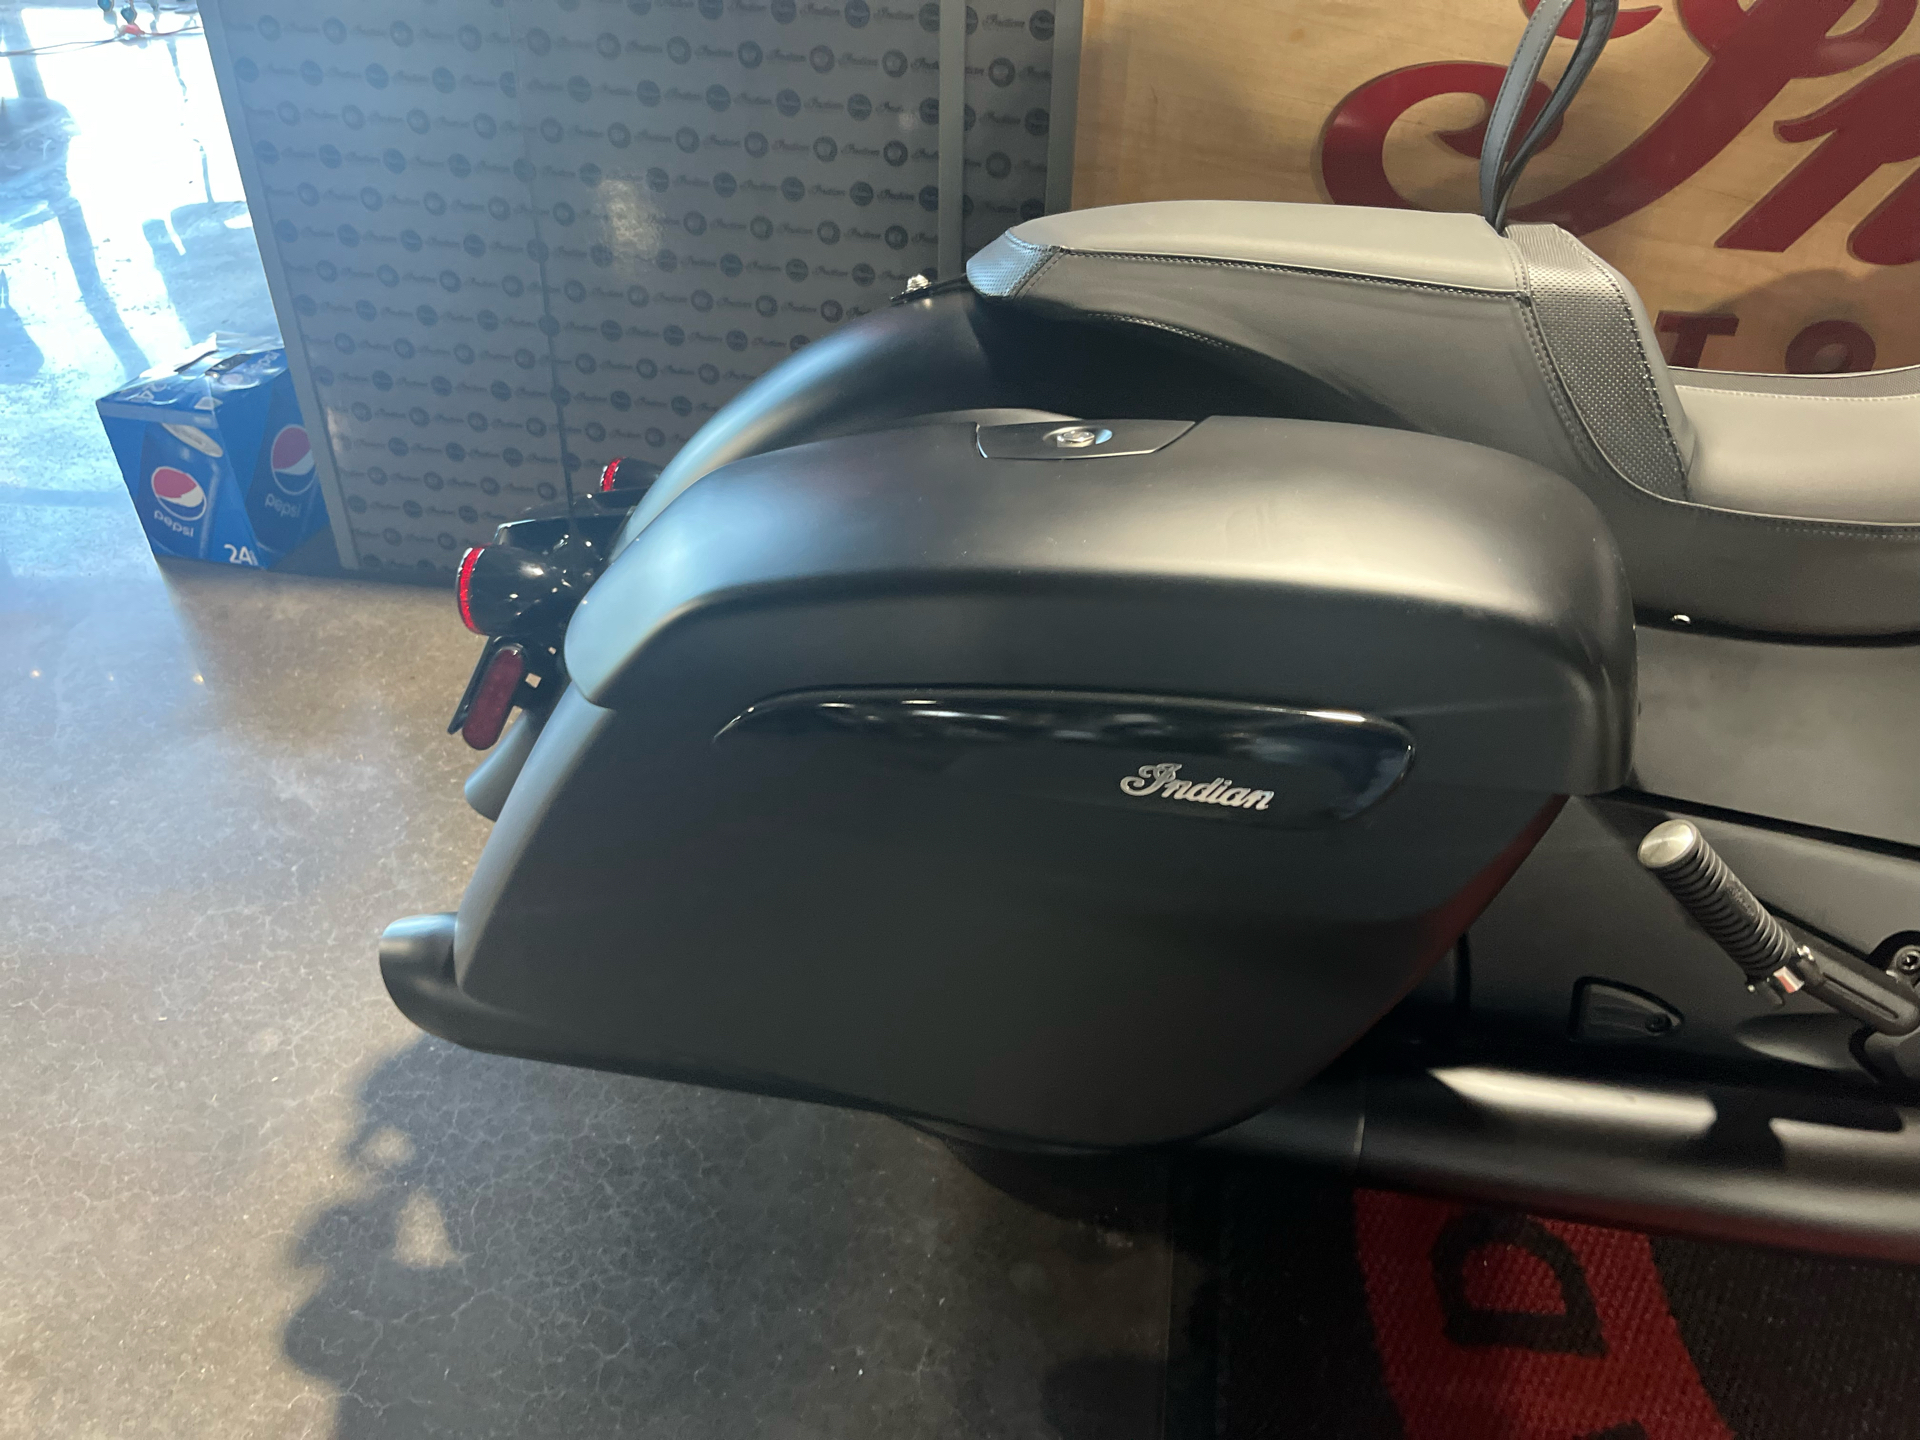 2023 Indian Motorcycle Chieftain® Dark Horse® in Blades, Delaware - Photo 3